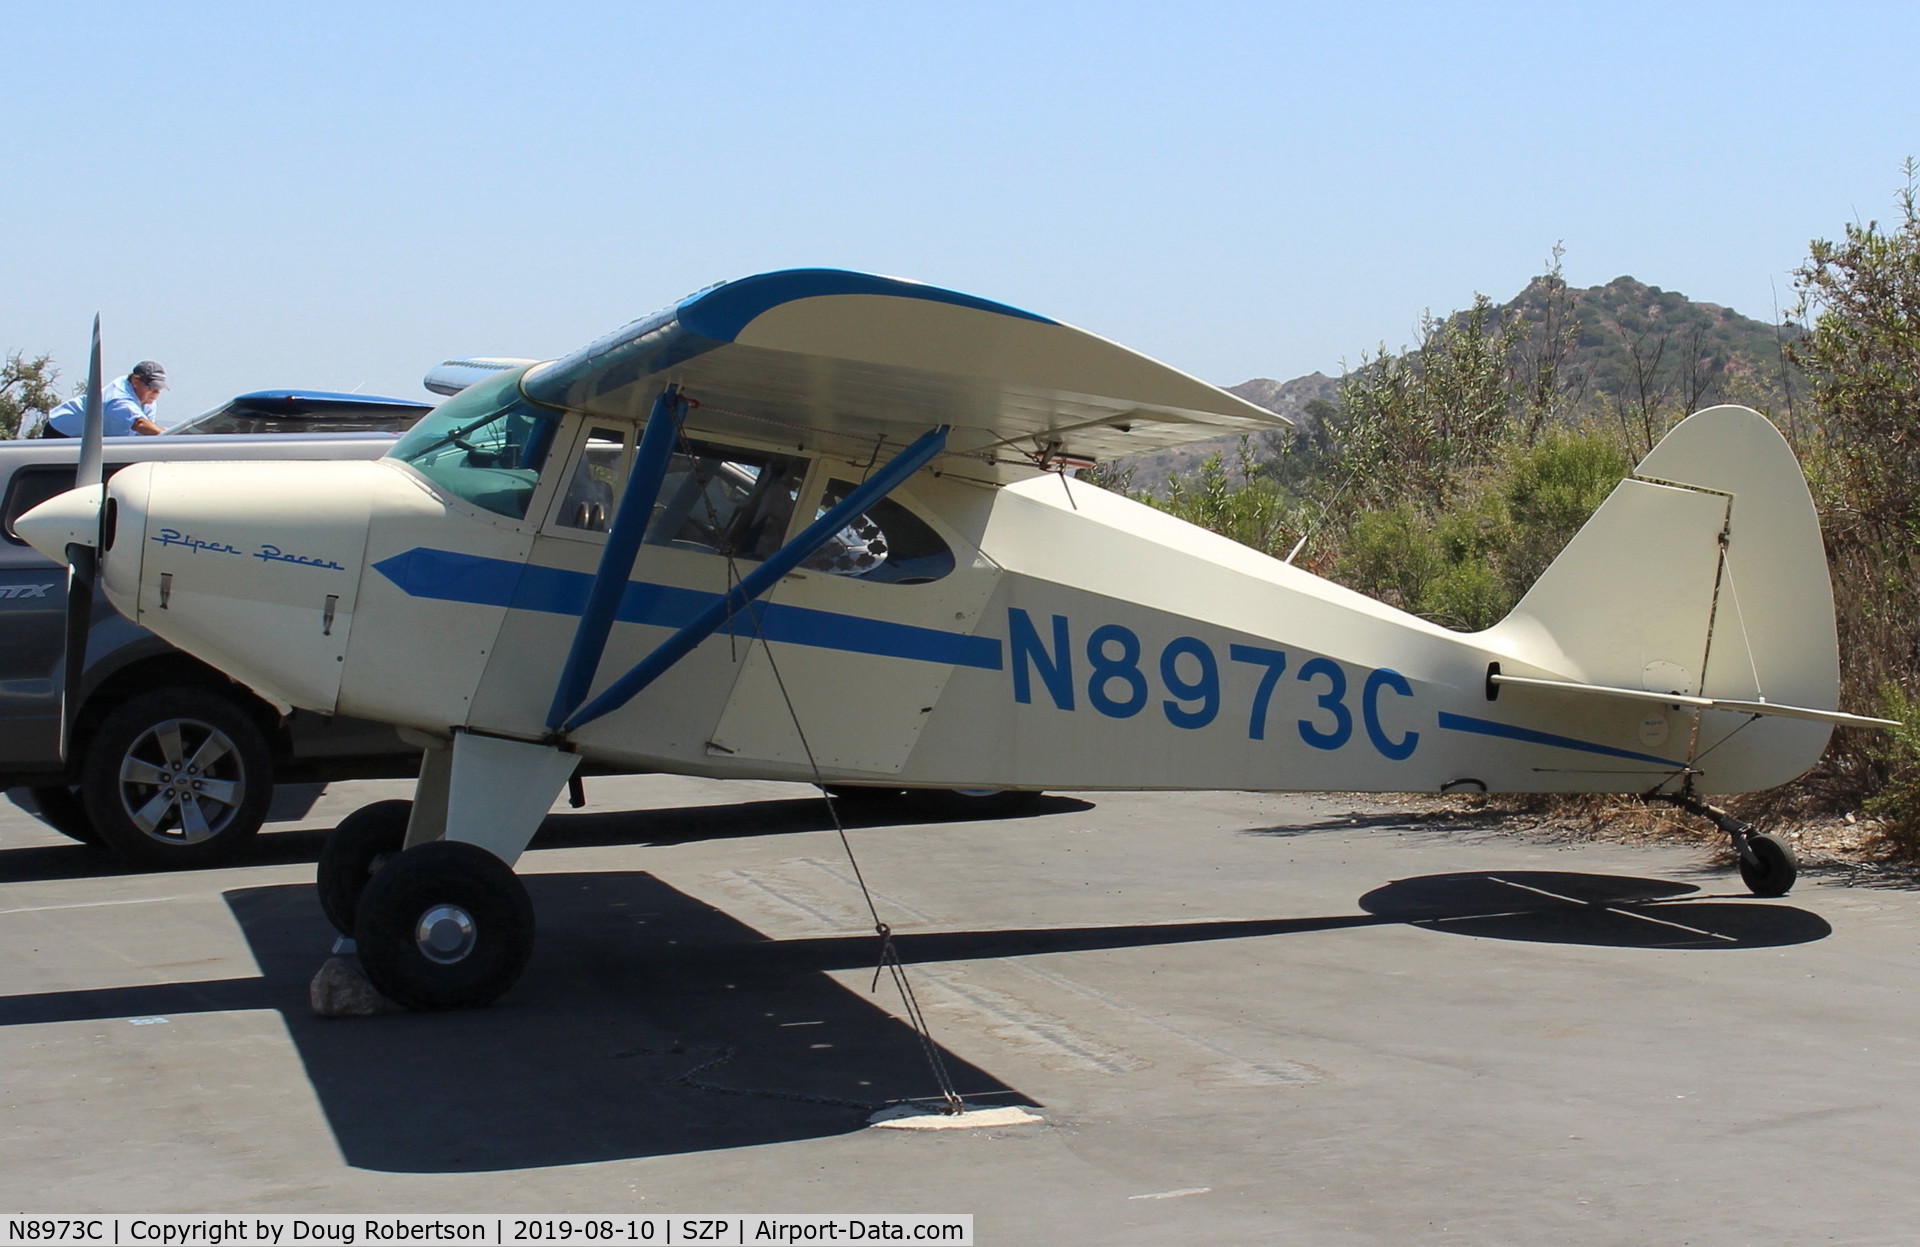 N8973C, 1953 Piper PA-22-135 Tri-Pacer C/N 22-1557, 1953 Piper PA-22-135 TRI-PACER, Lycoming O-290 135 Hp